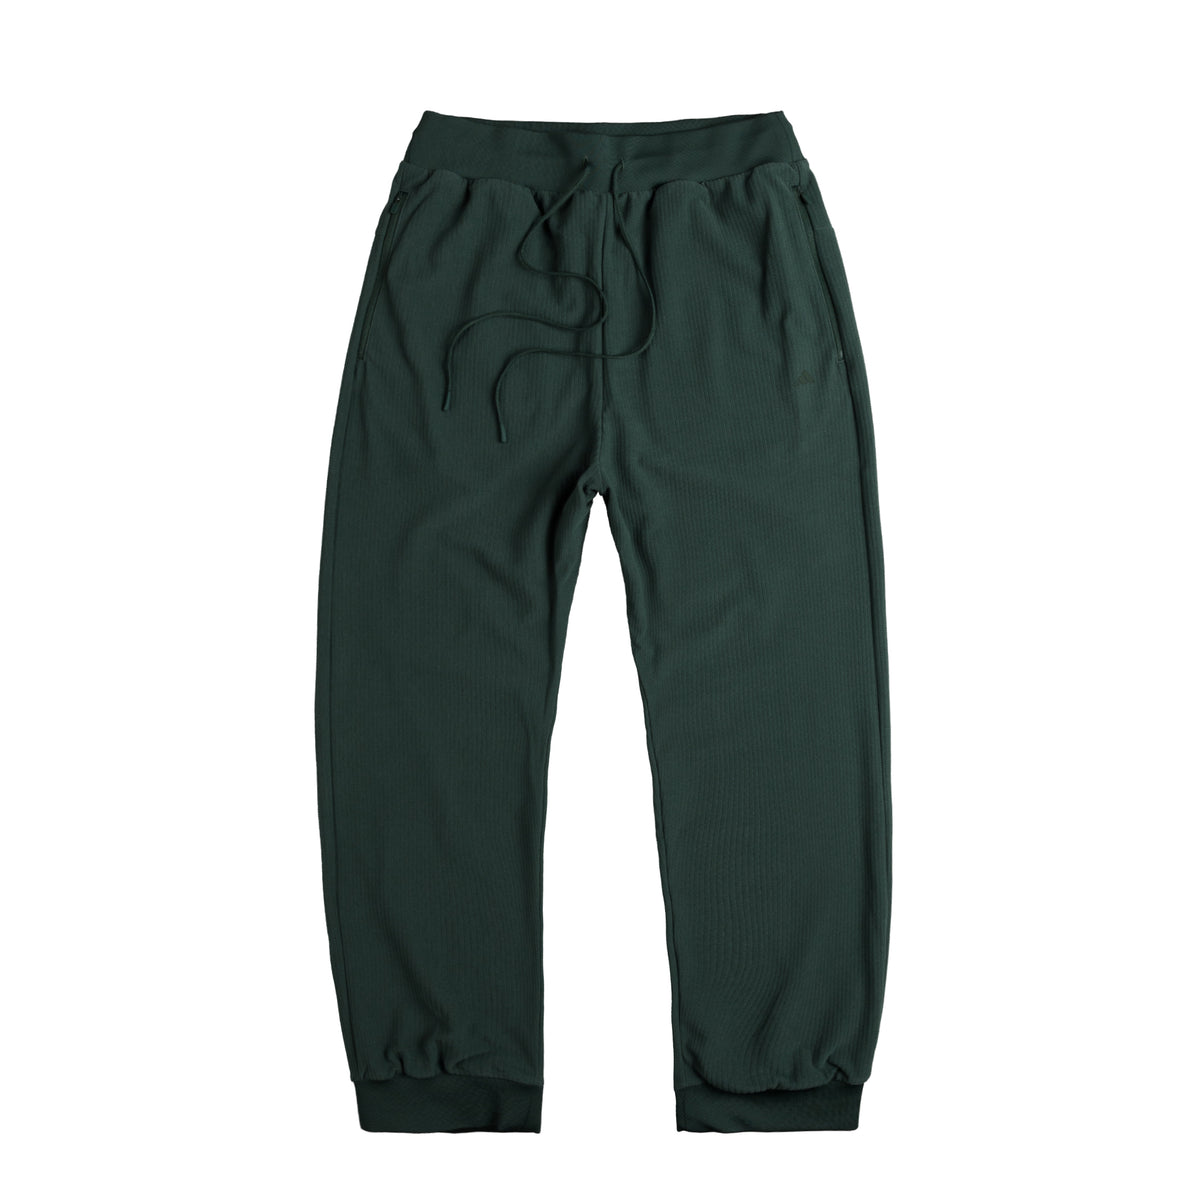 Adidas Basketball Brushed Track Pant » Buy online now!